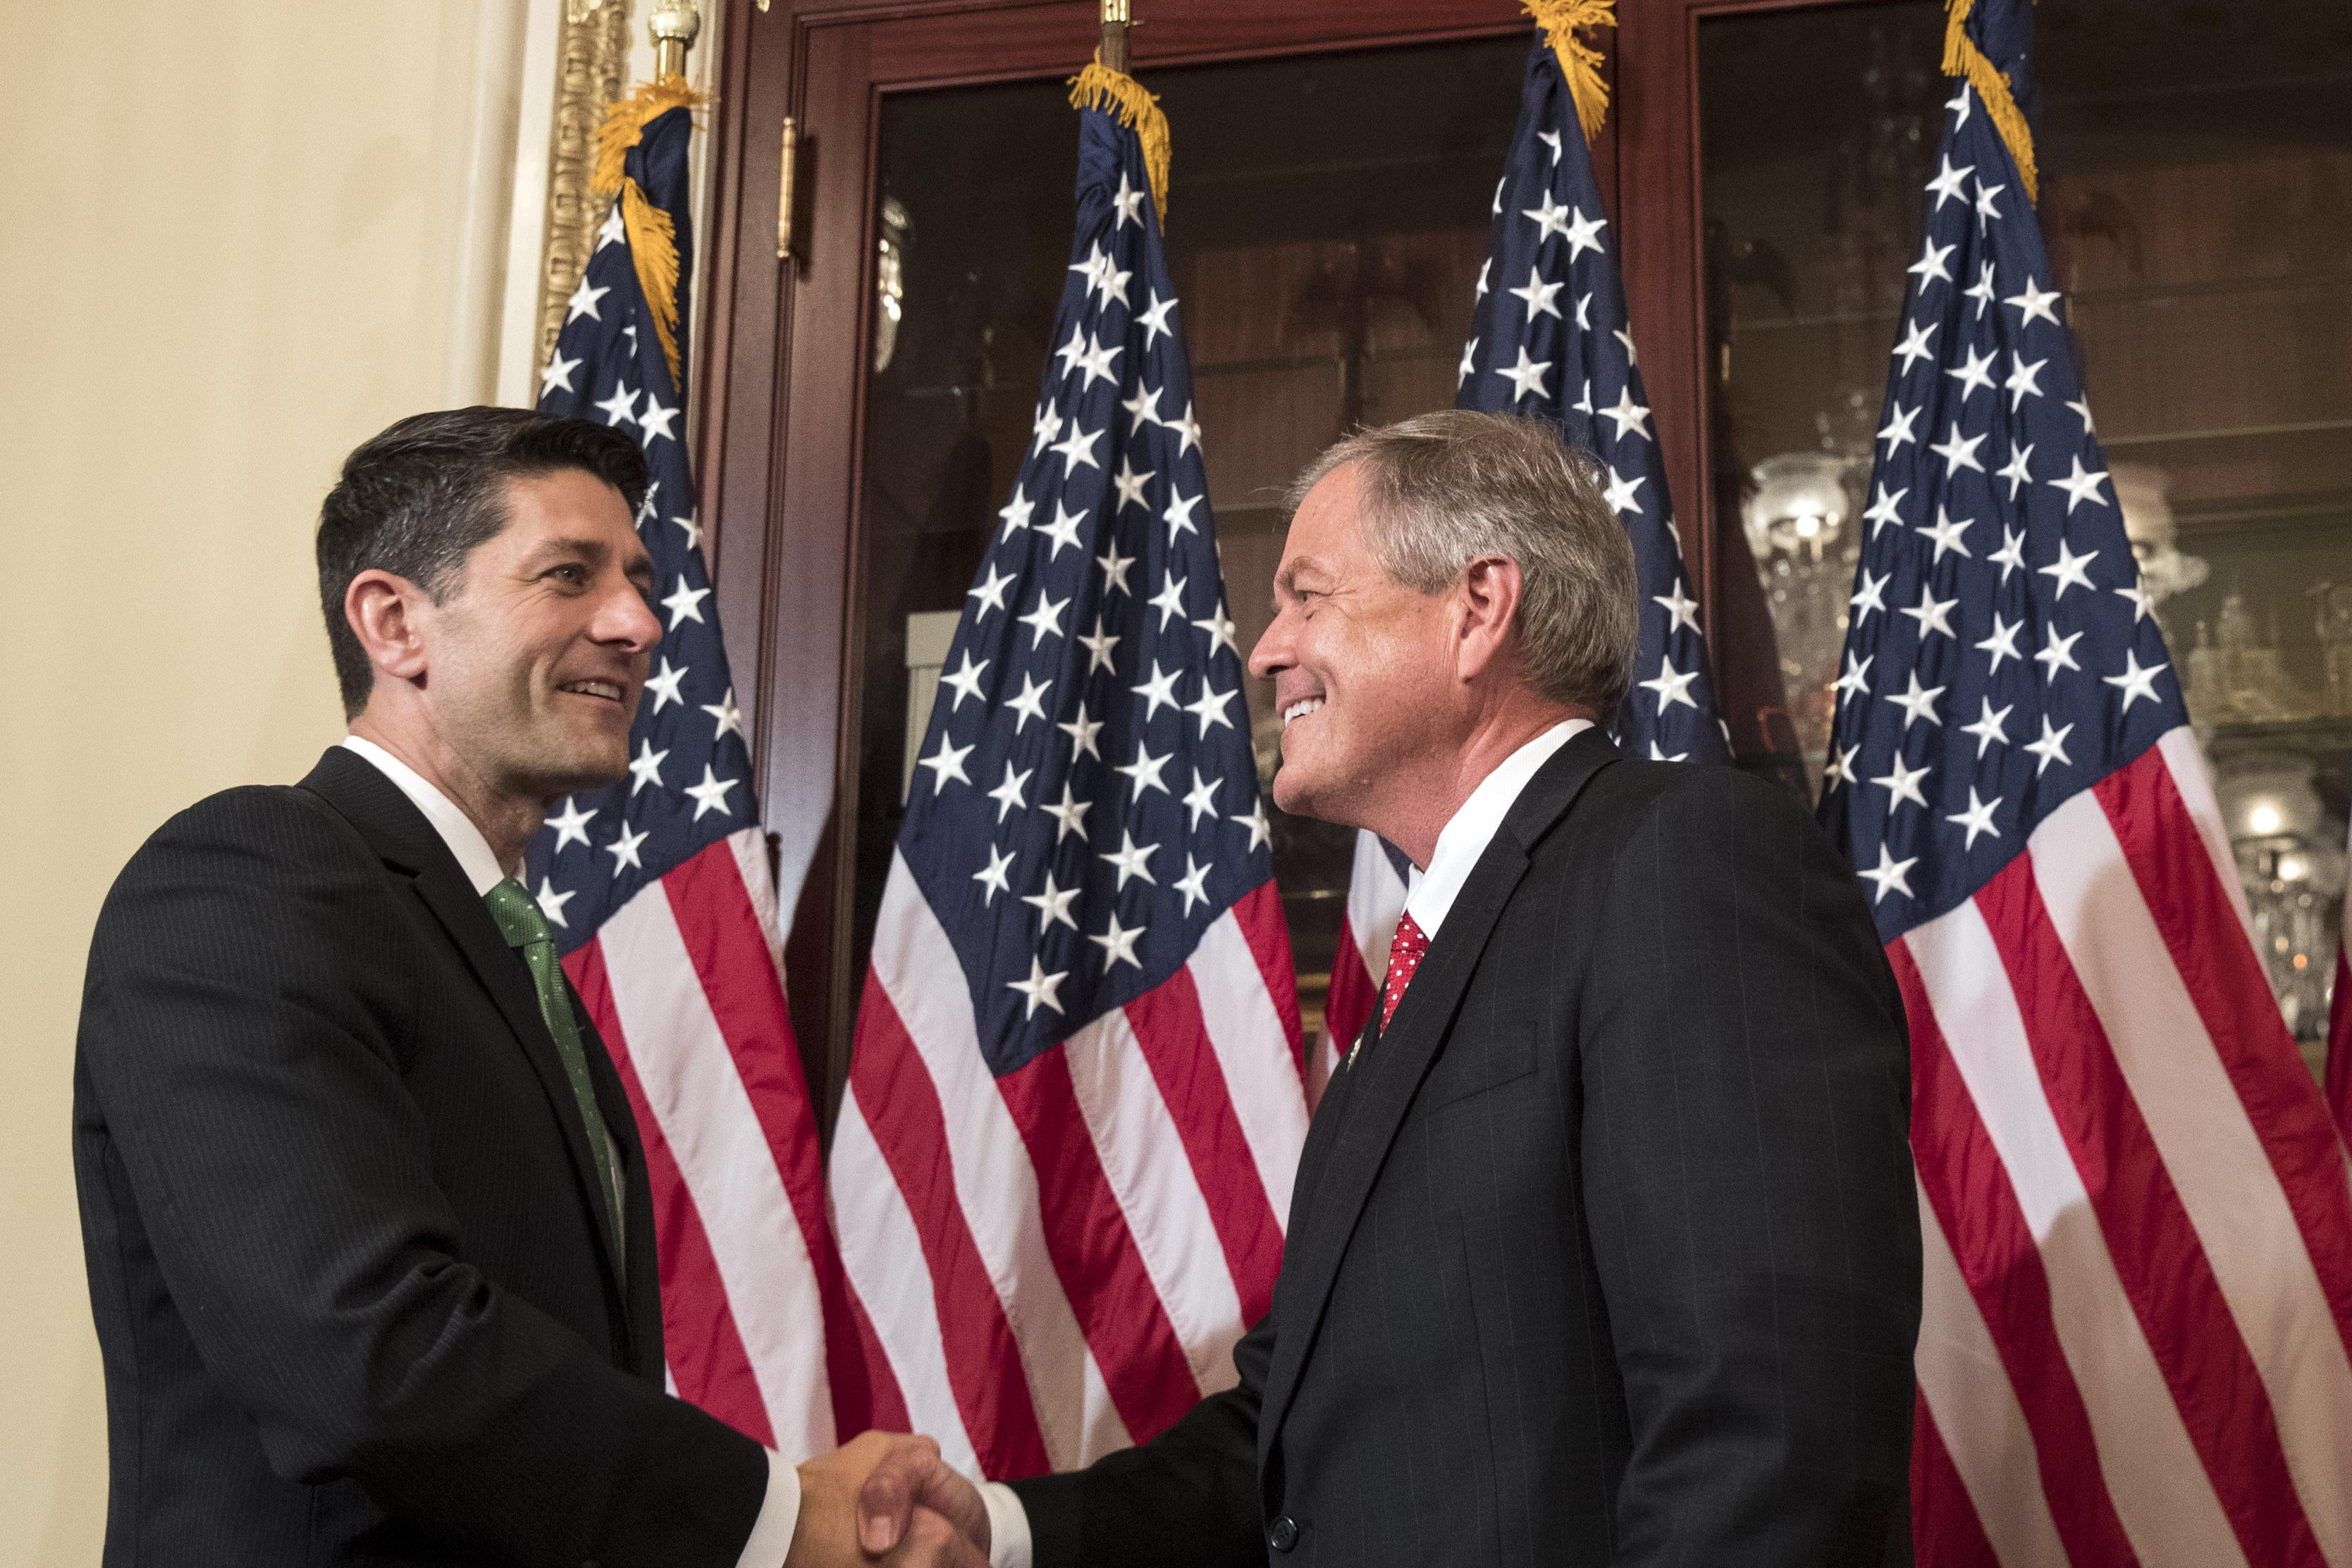 Speaker of the House Paul Ryan shakes hands with Representative-elect Ralph Norman (R-SC) during in a ceremonial swearing-in on Capitol Hill, June 26, 2017 in Washington, D.C.